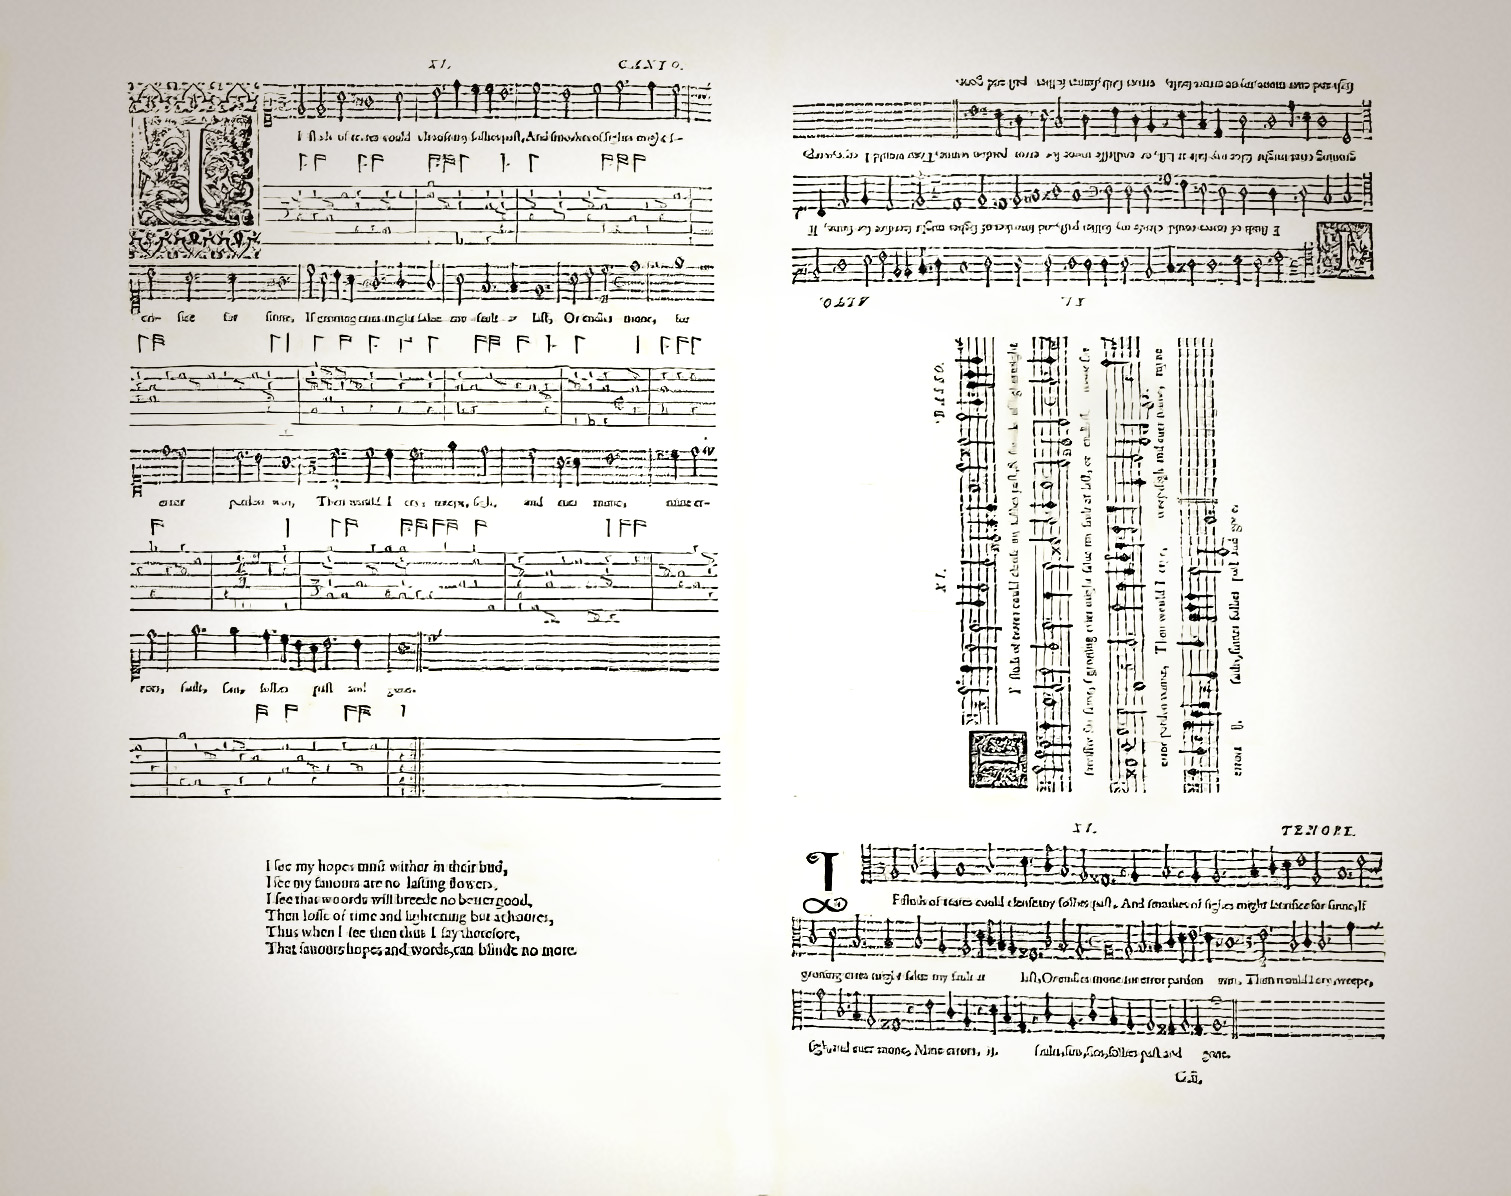 Second booke of songs or ayres | John Dowland (1563-1626) | Music score for performers sitting at a card table.